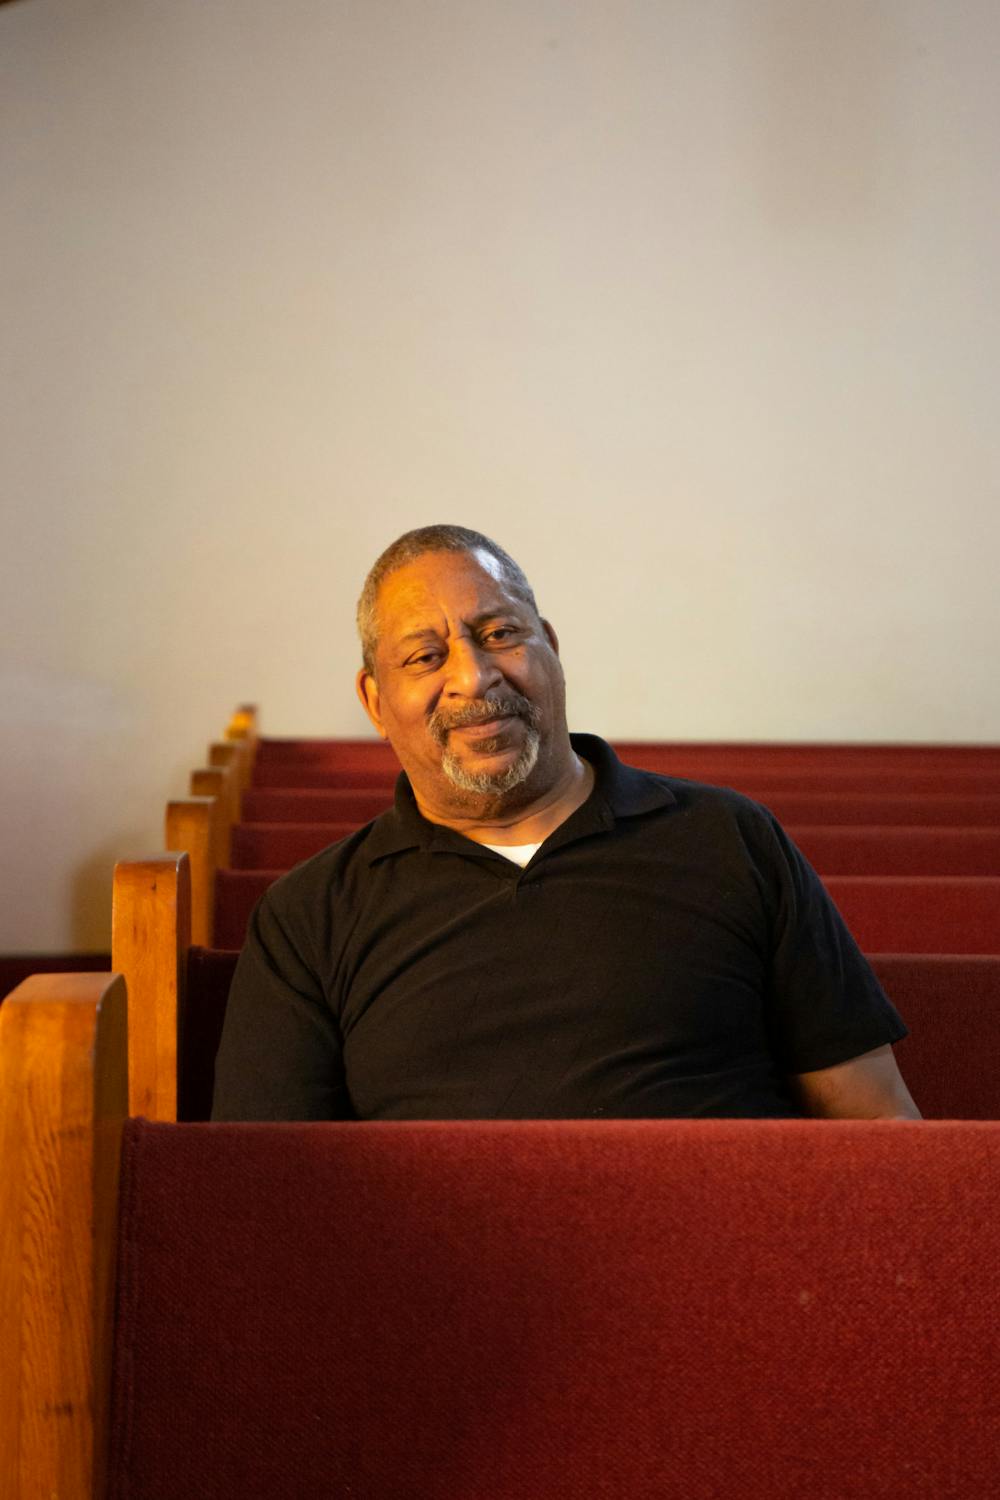 Rev. Maurice Reed sits in the pews of Bethel African Methodist Episcopal (AME) church in Muncie, Ind. Bethel AME, established in 1868, is the oldest Black church in Delaware County. Alex Bracken, DN